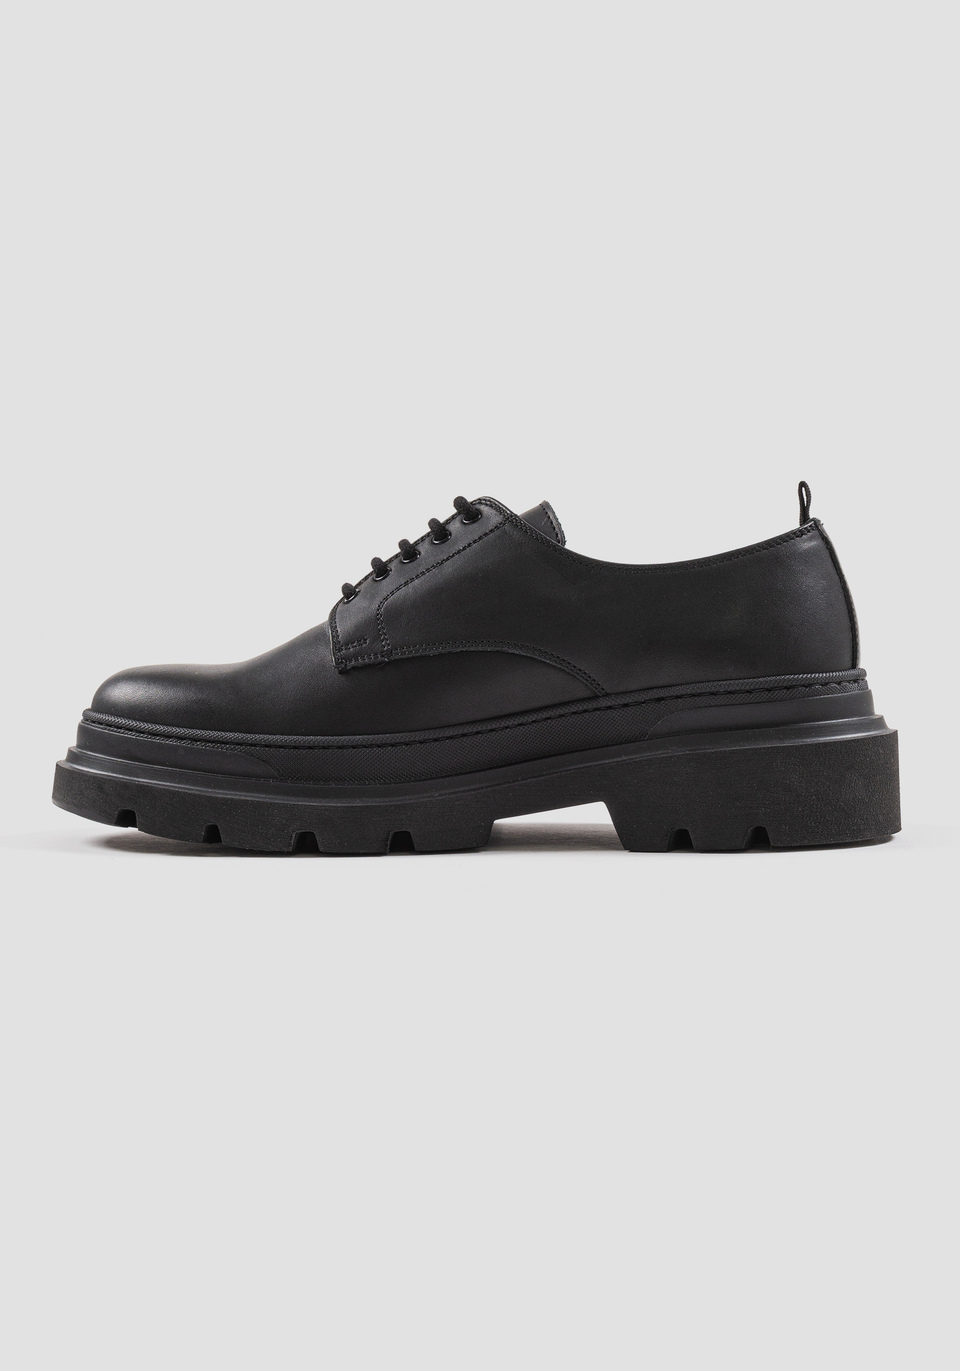 "YUKON" LEATHER DERBY SHOES WITH LUG SOLES - Antony Morato Online Shop